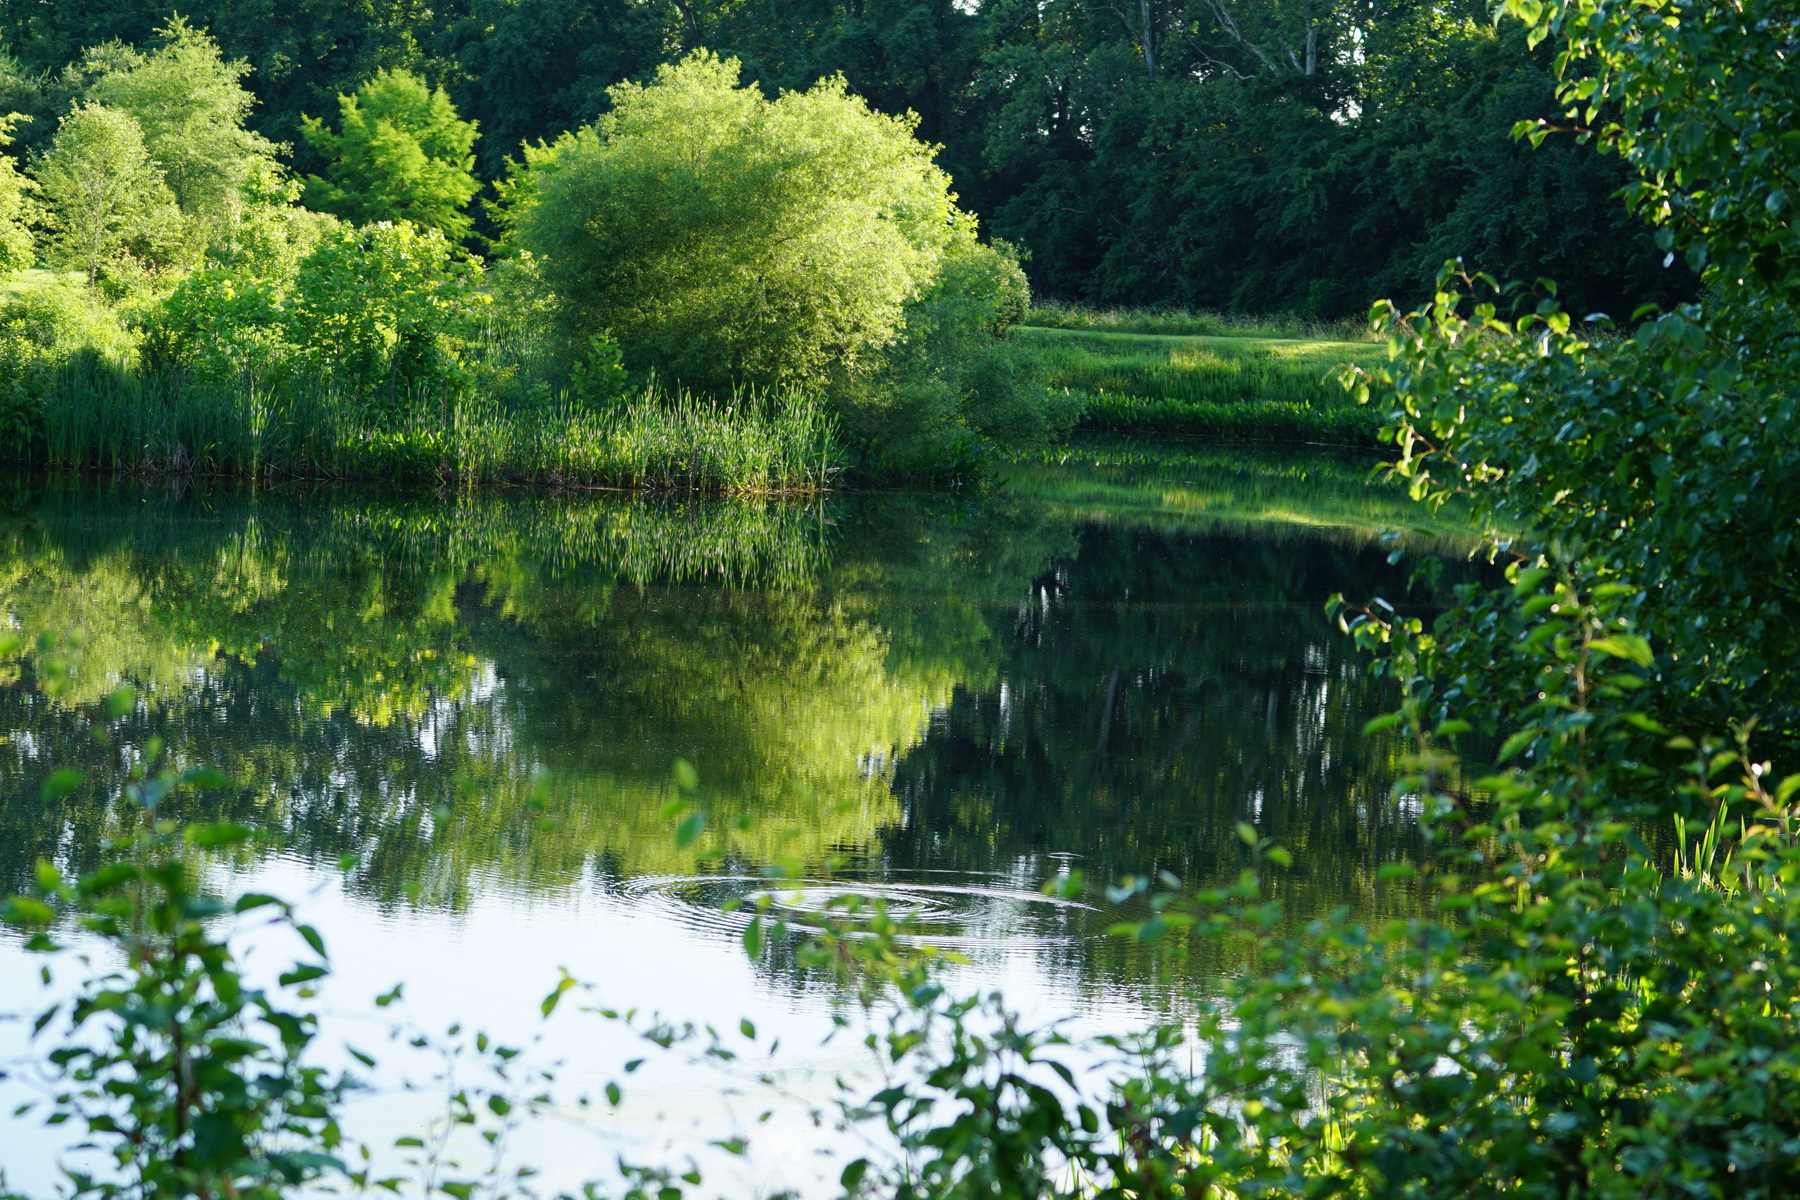 Storm Water Pond Reflections 4.jpg